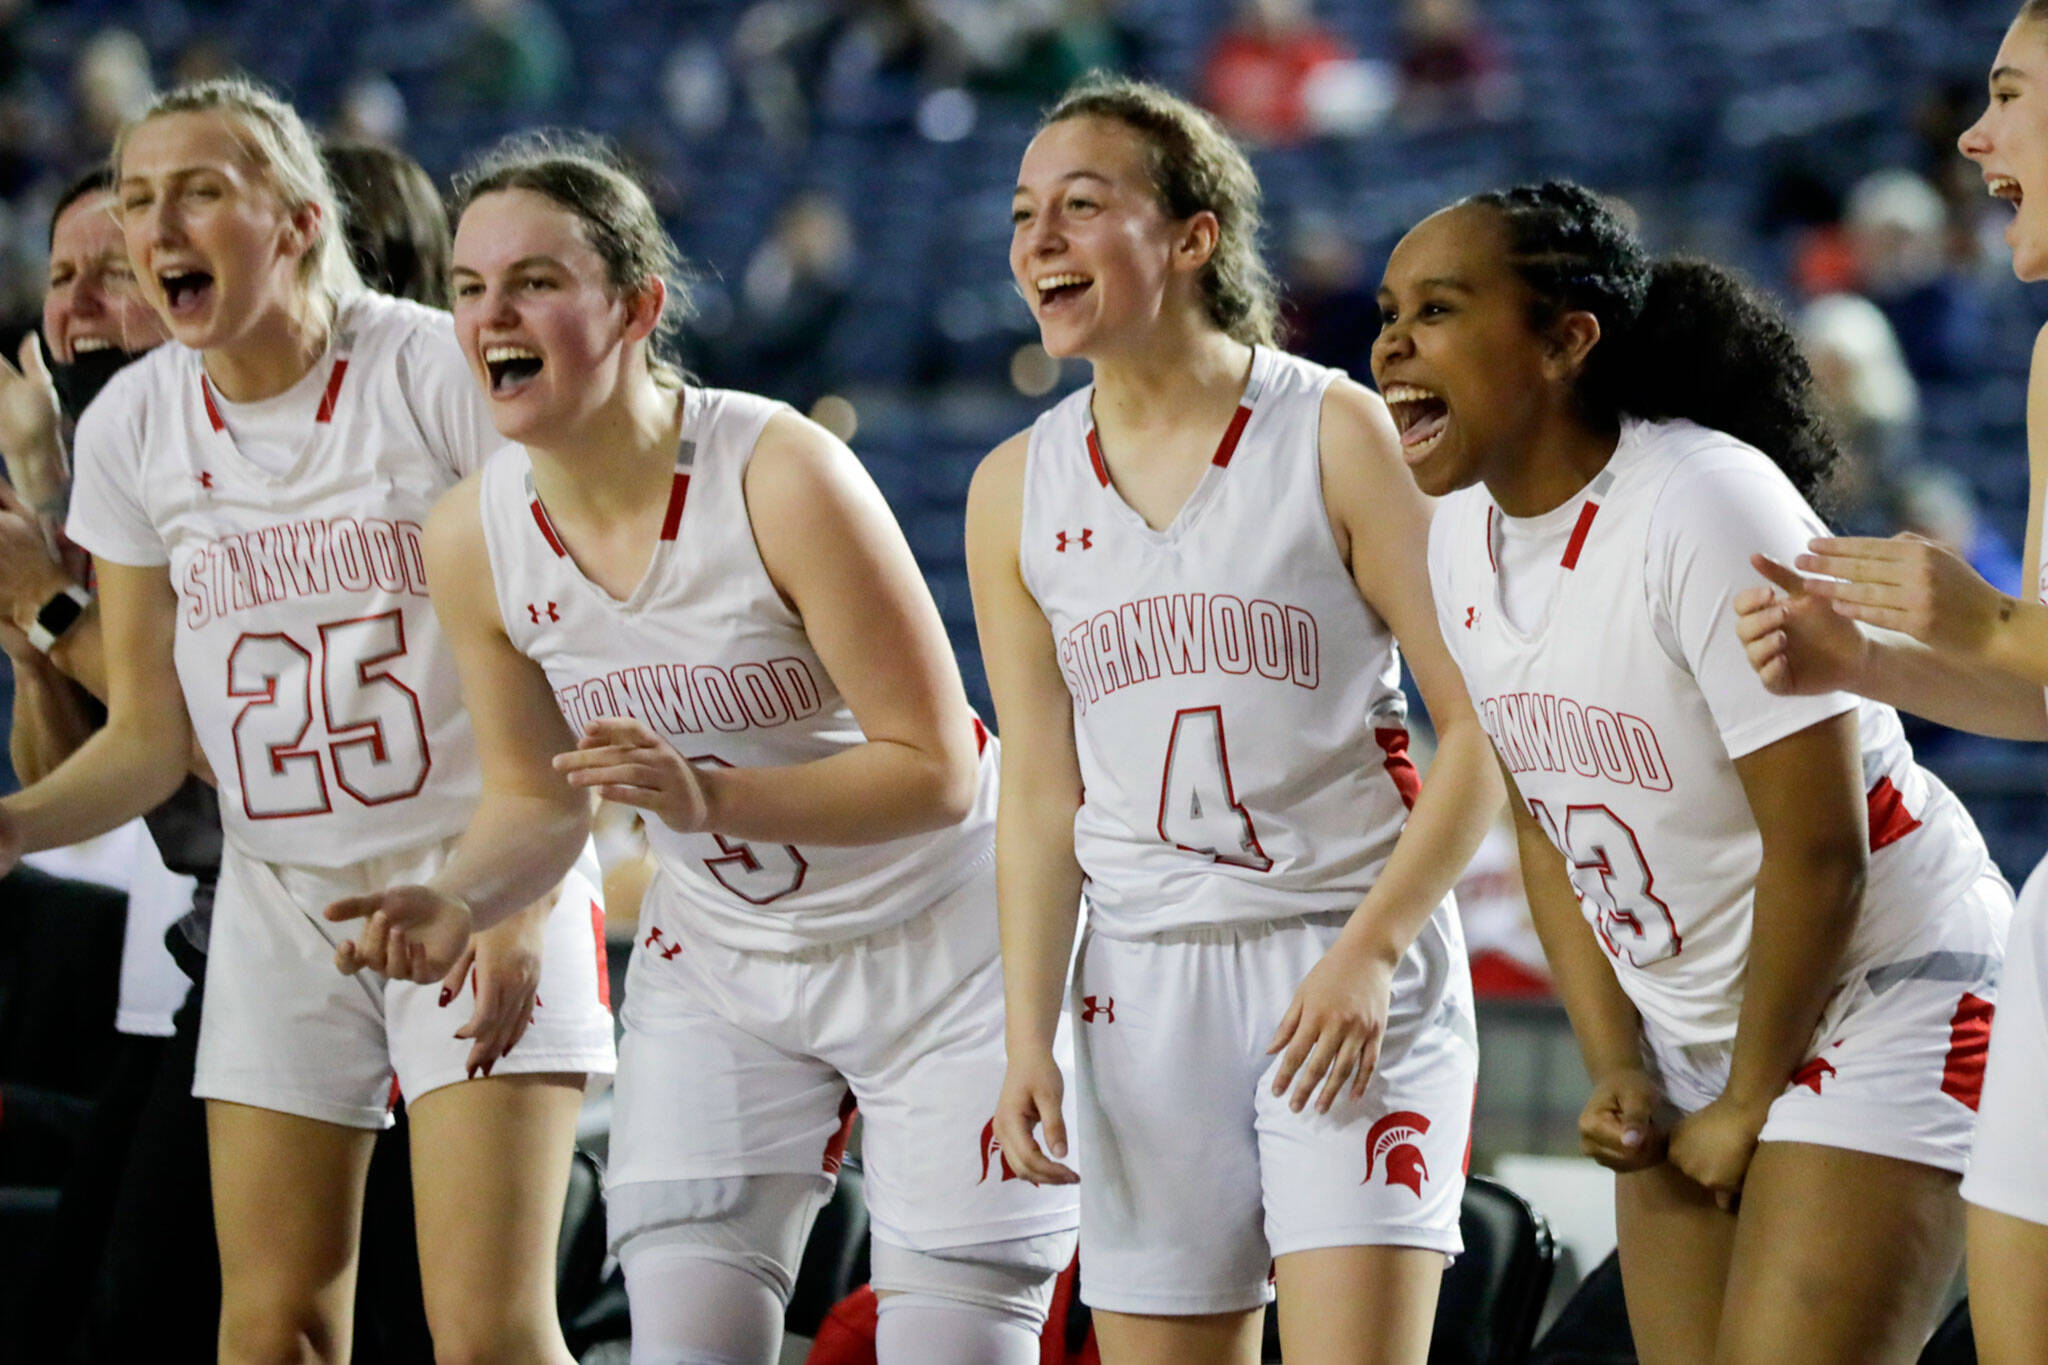 Stanwood’s bench cheers its team against Auburn on Wednesday evening in Tacoma. The Spartans advance with their 53-39 victory over the Trojans. (Kevin Clark / The Herald)